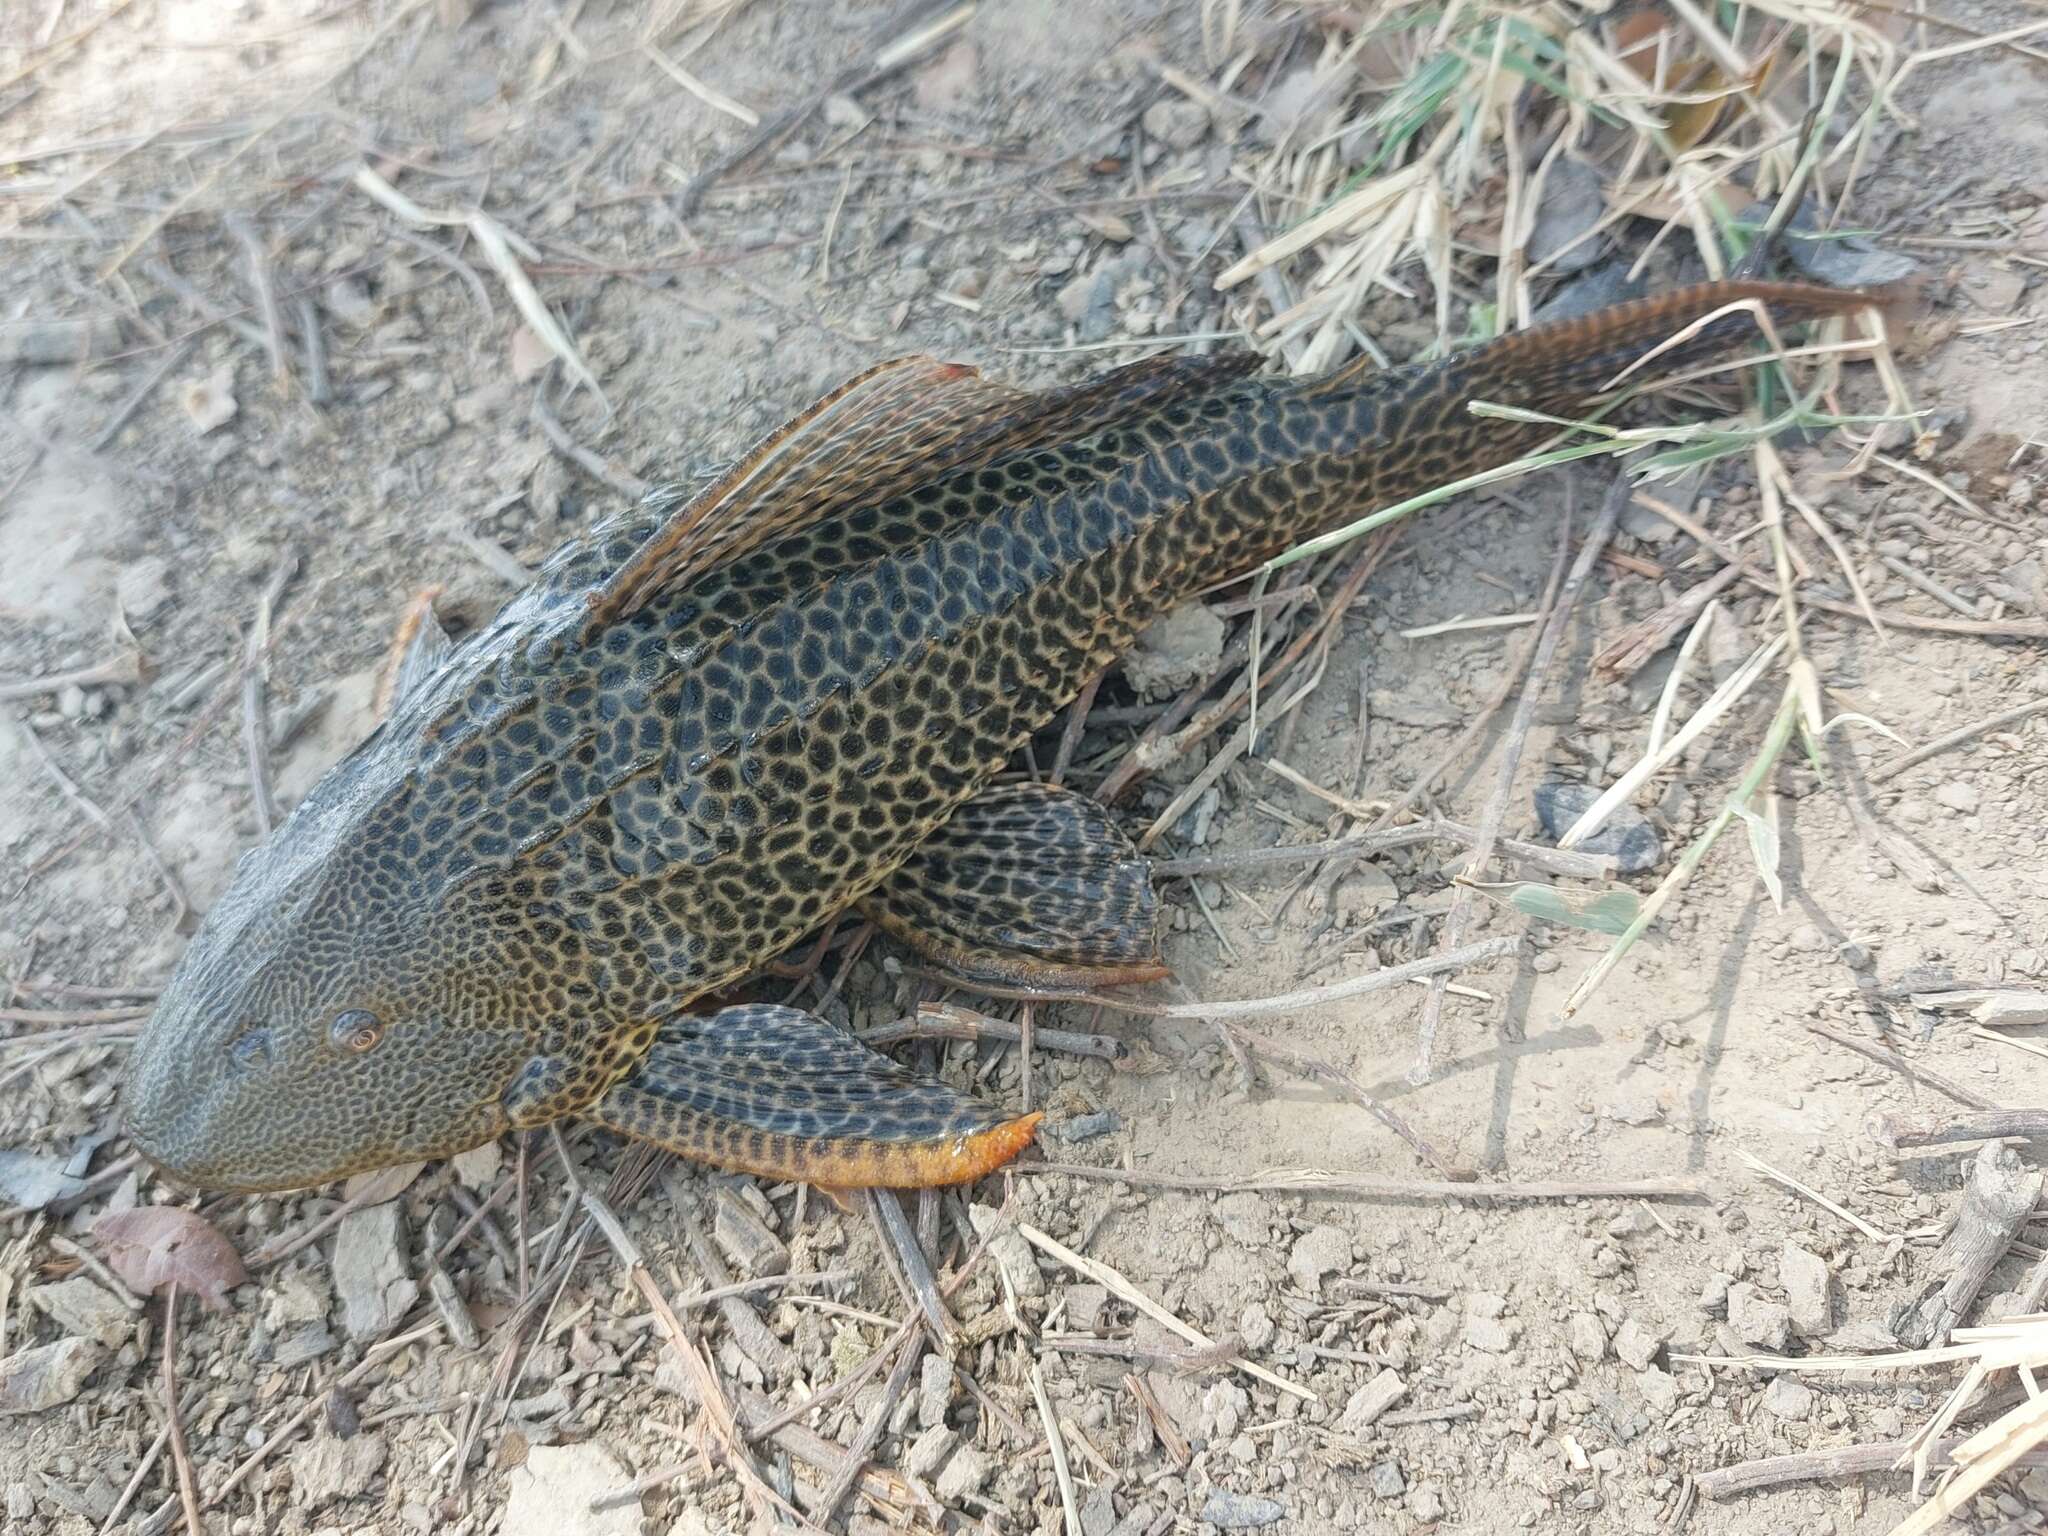 Image of Long-fin armored catfish